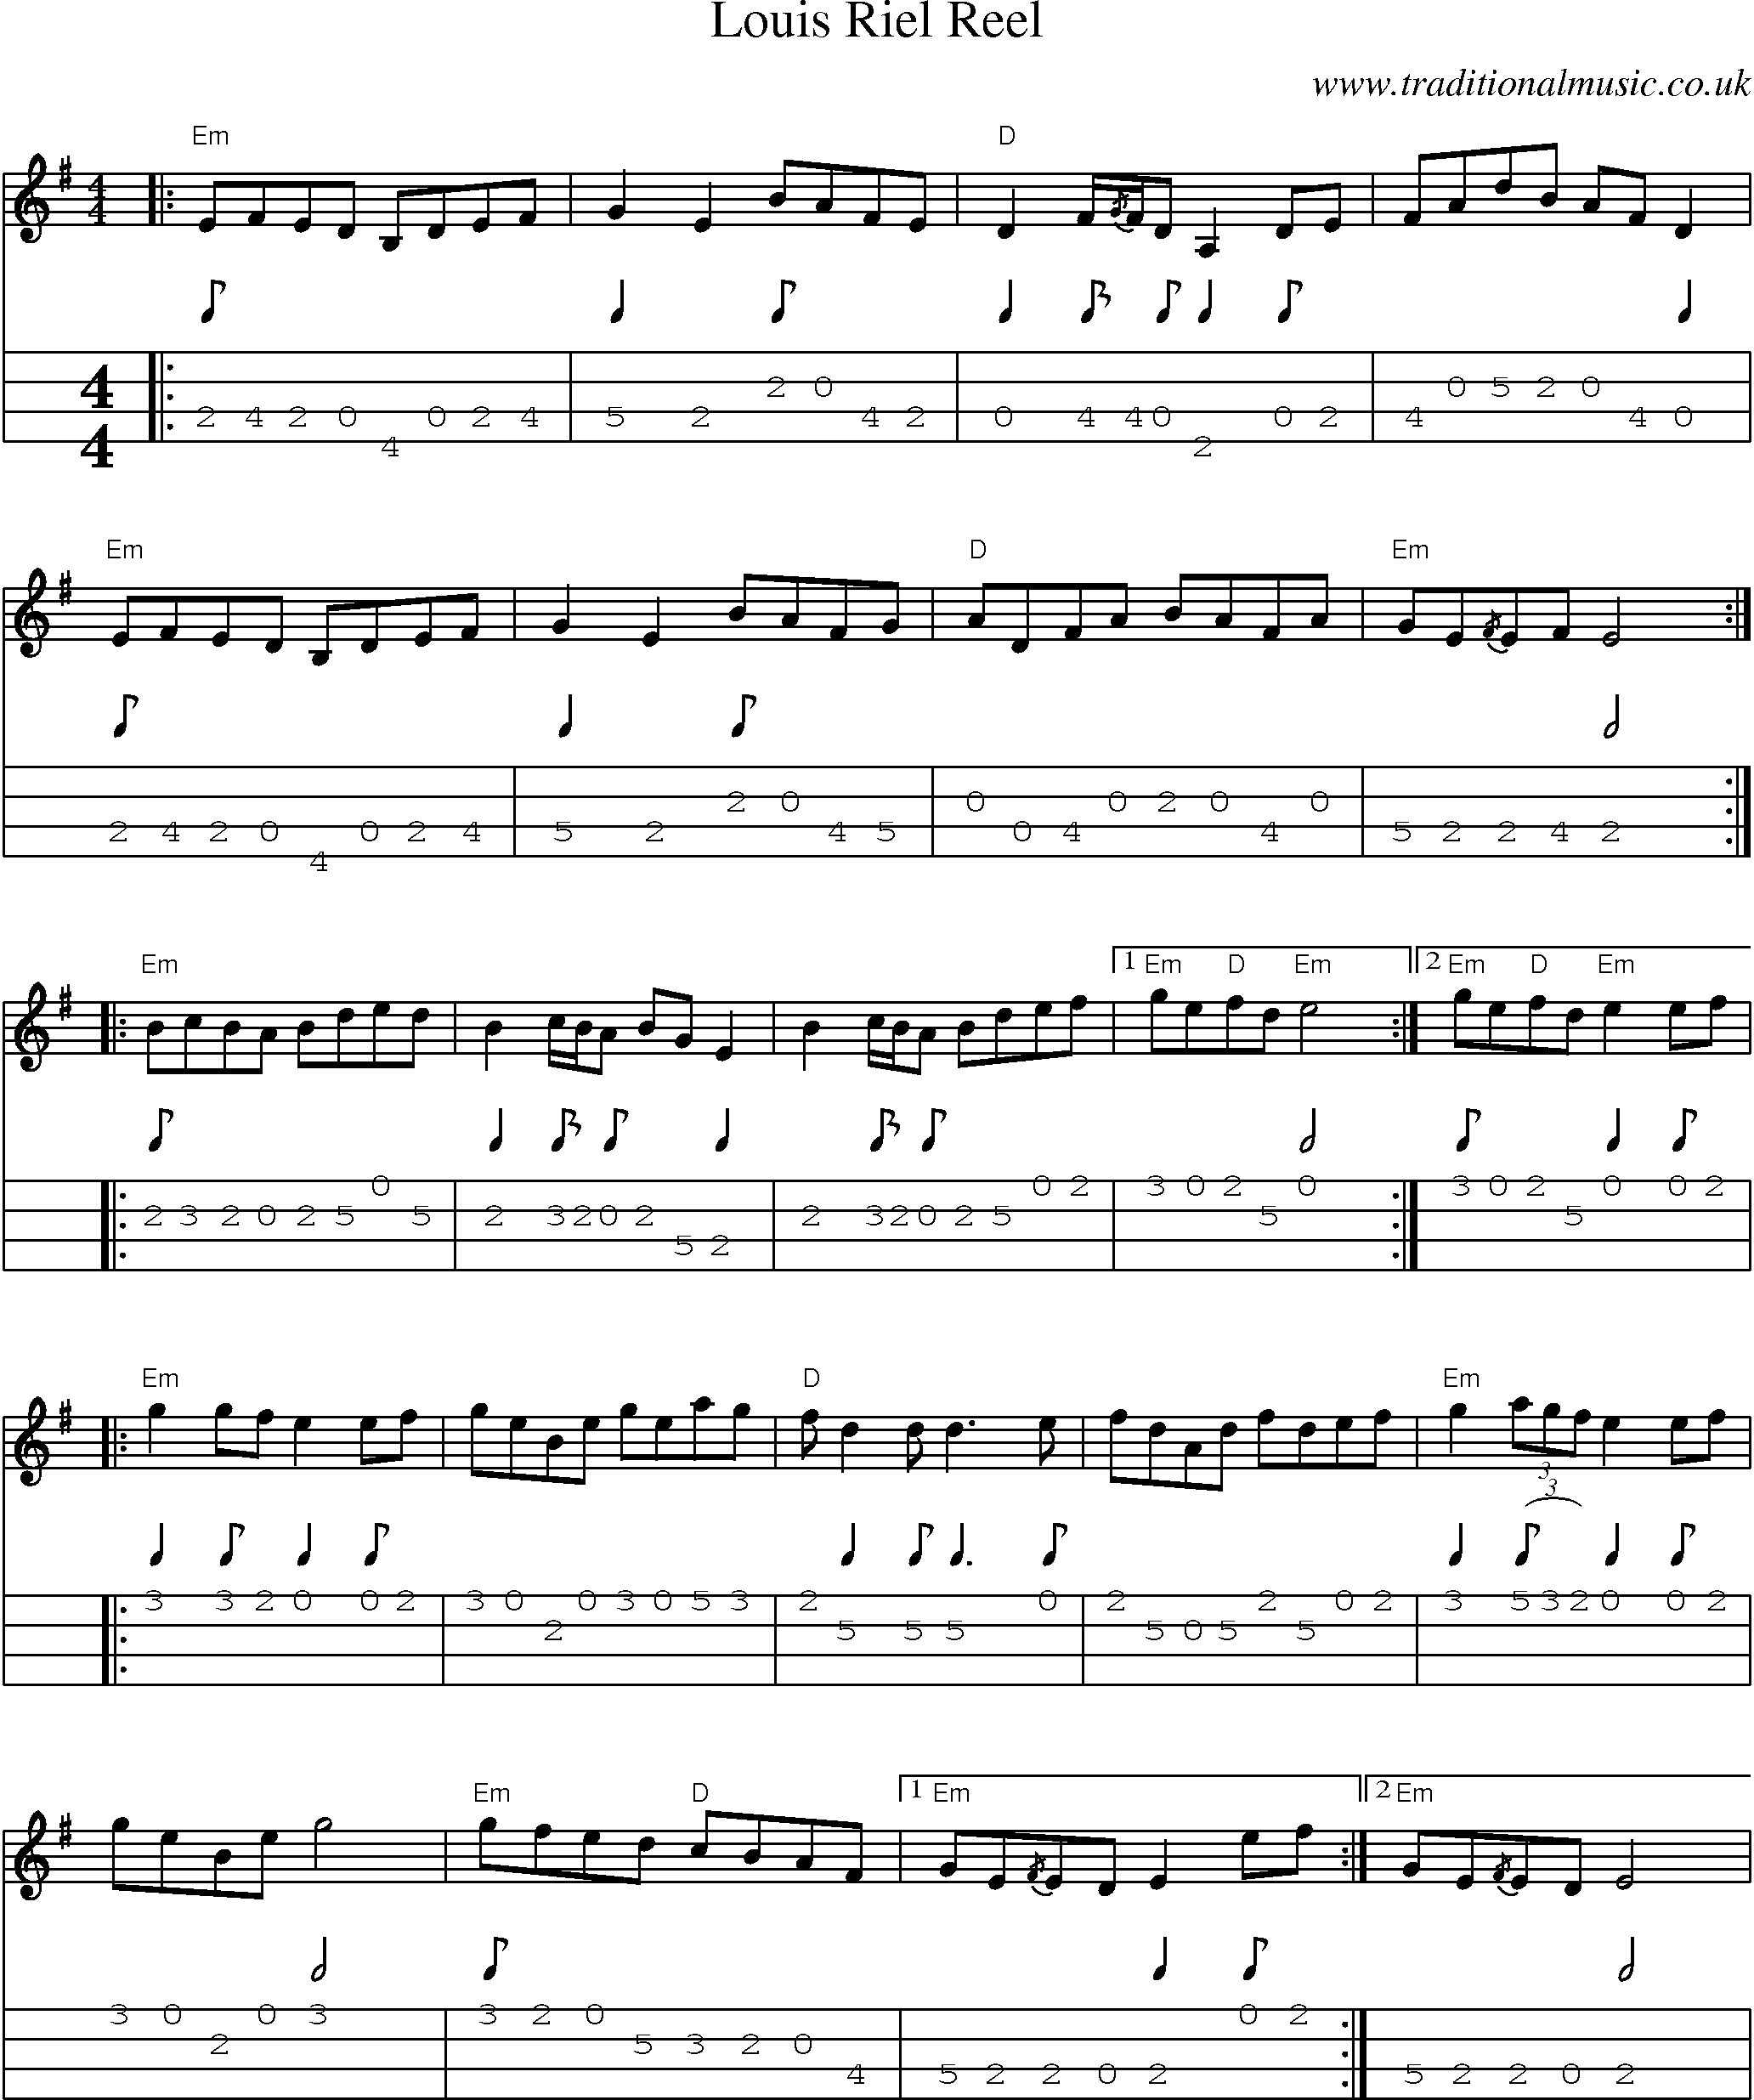 Music Score and Mandolin Tabs for Louis Riel Reel